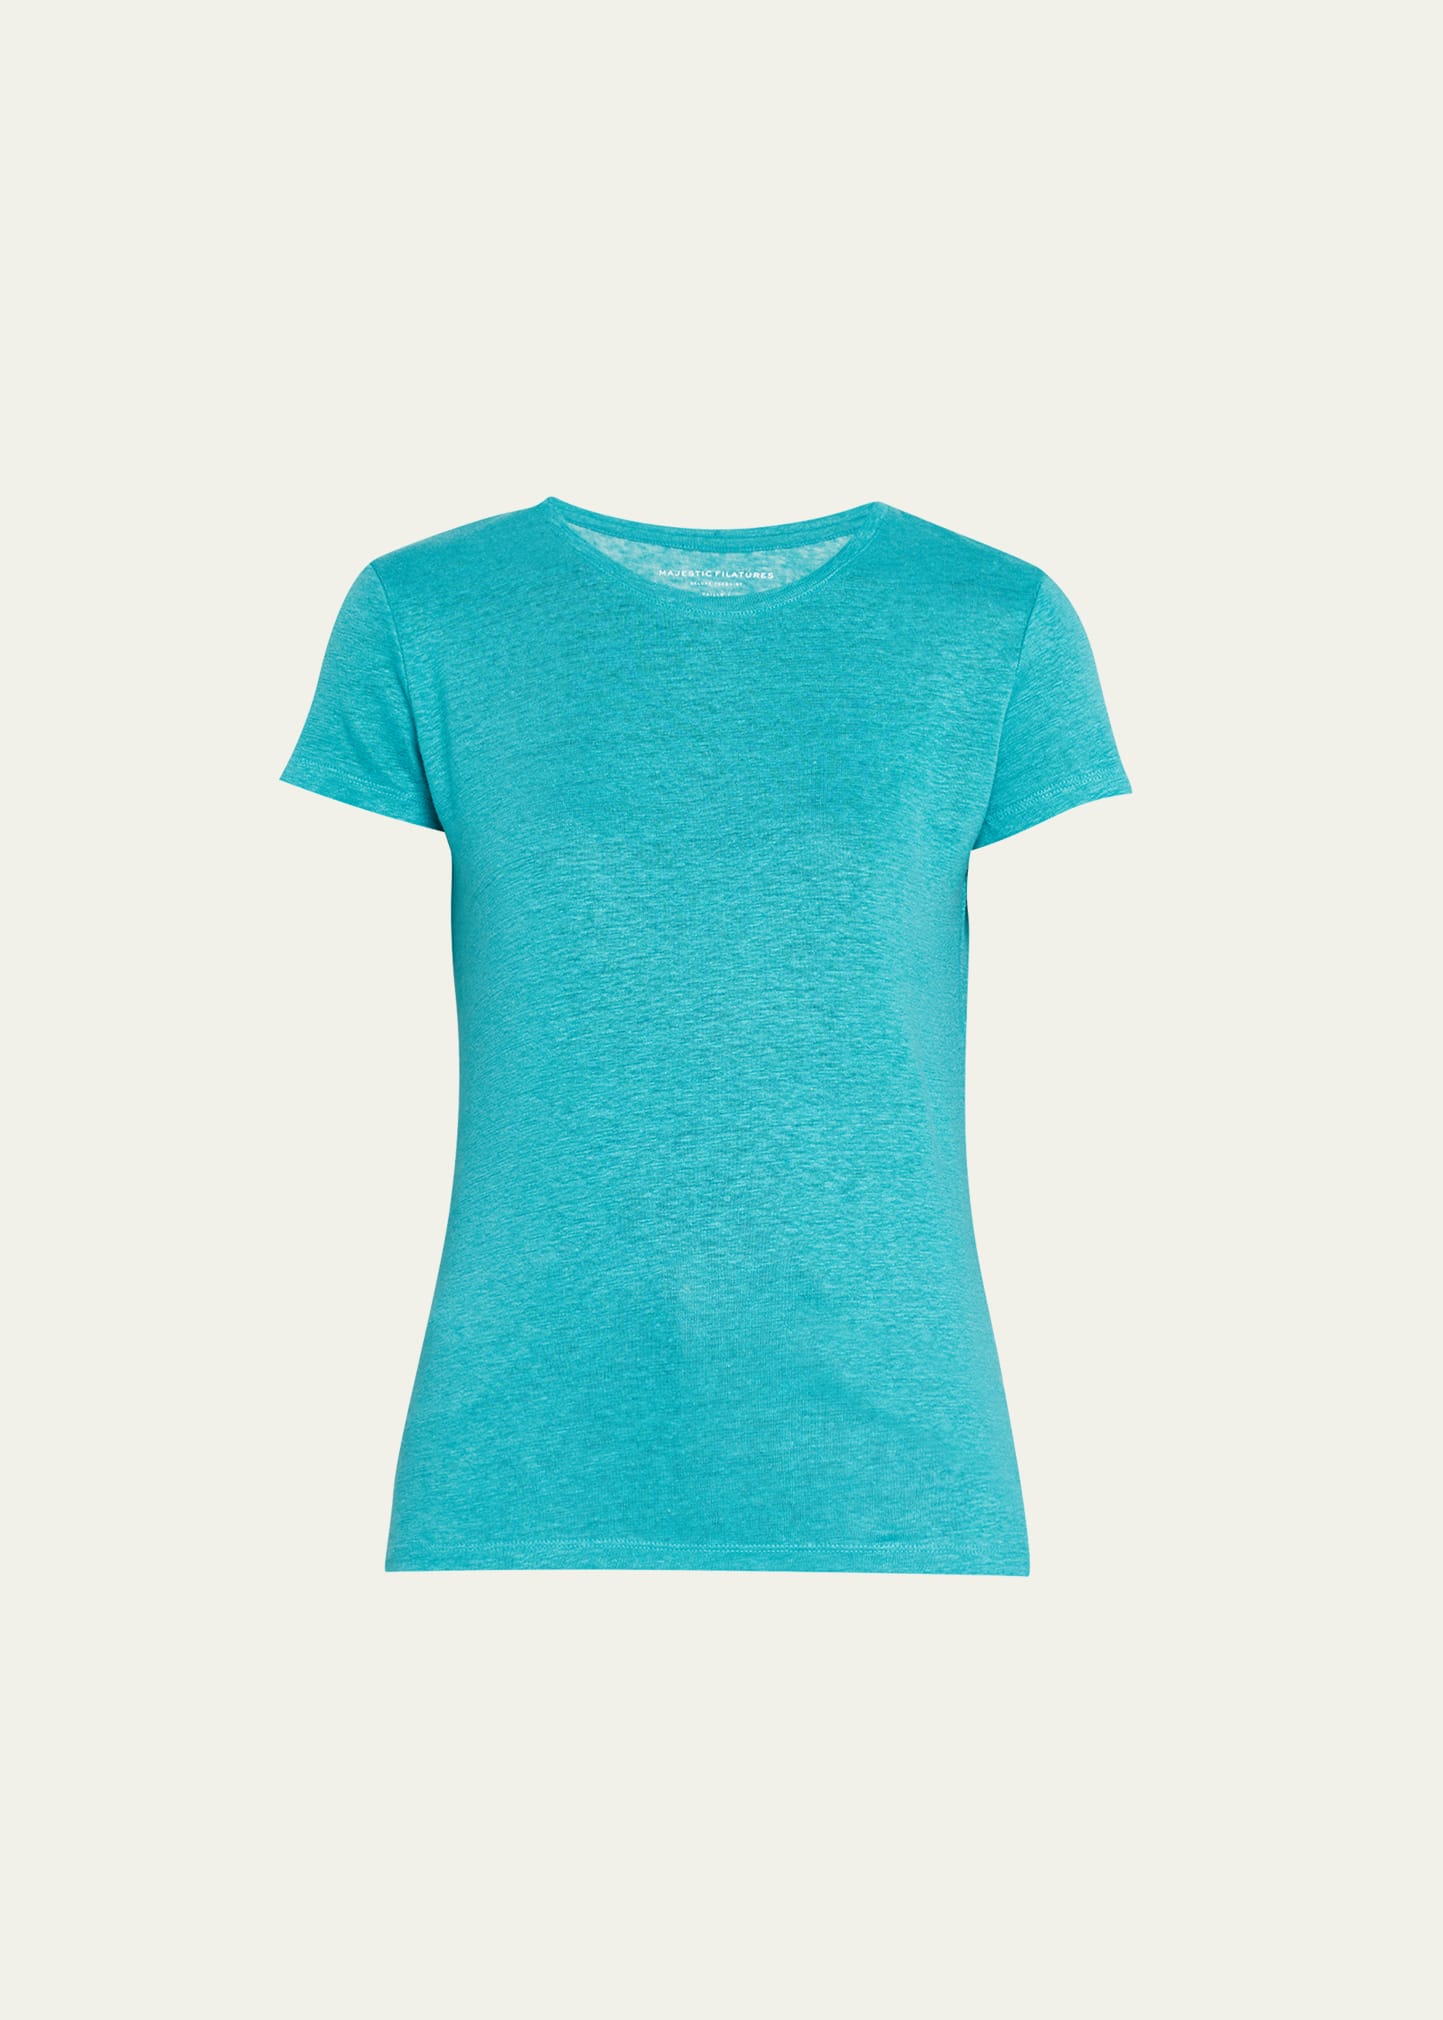 Majestic Stretch Linen Crewneck Tee In Turquoise